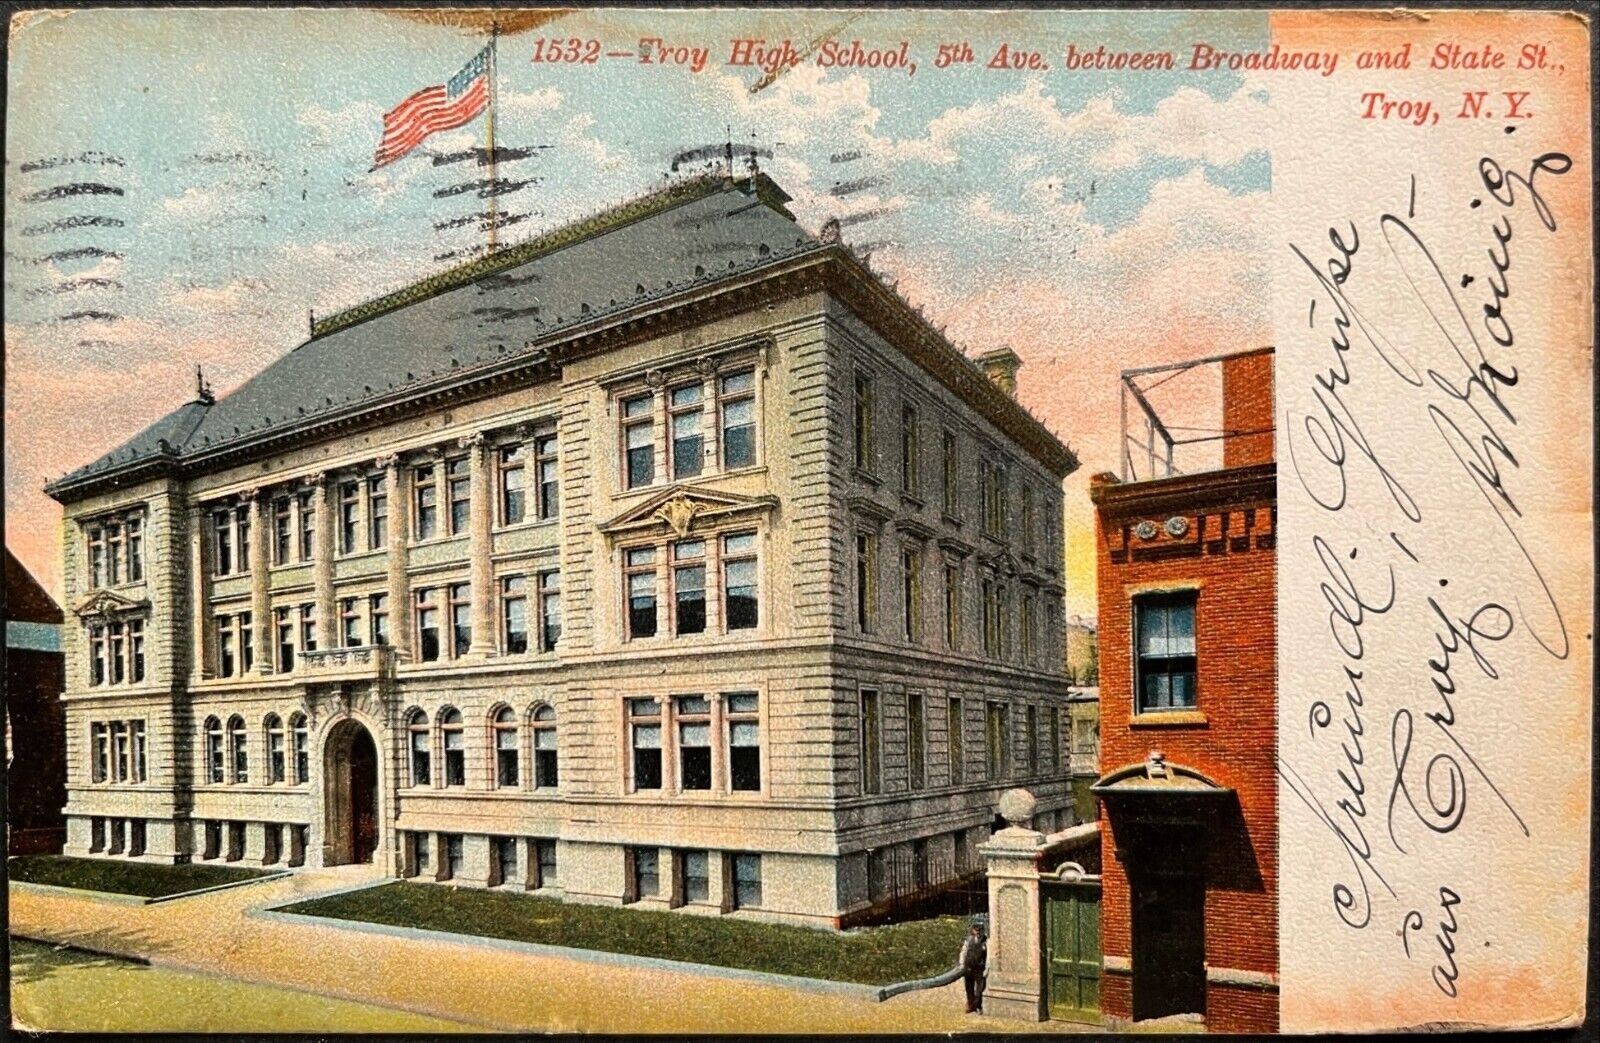 1907 Troy, NY PC Troy High school 5th ave between Broadway and State St.